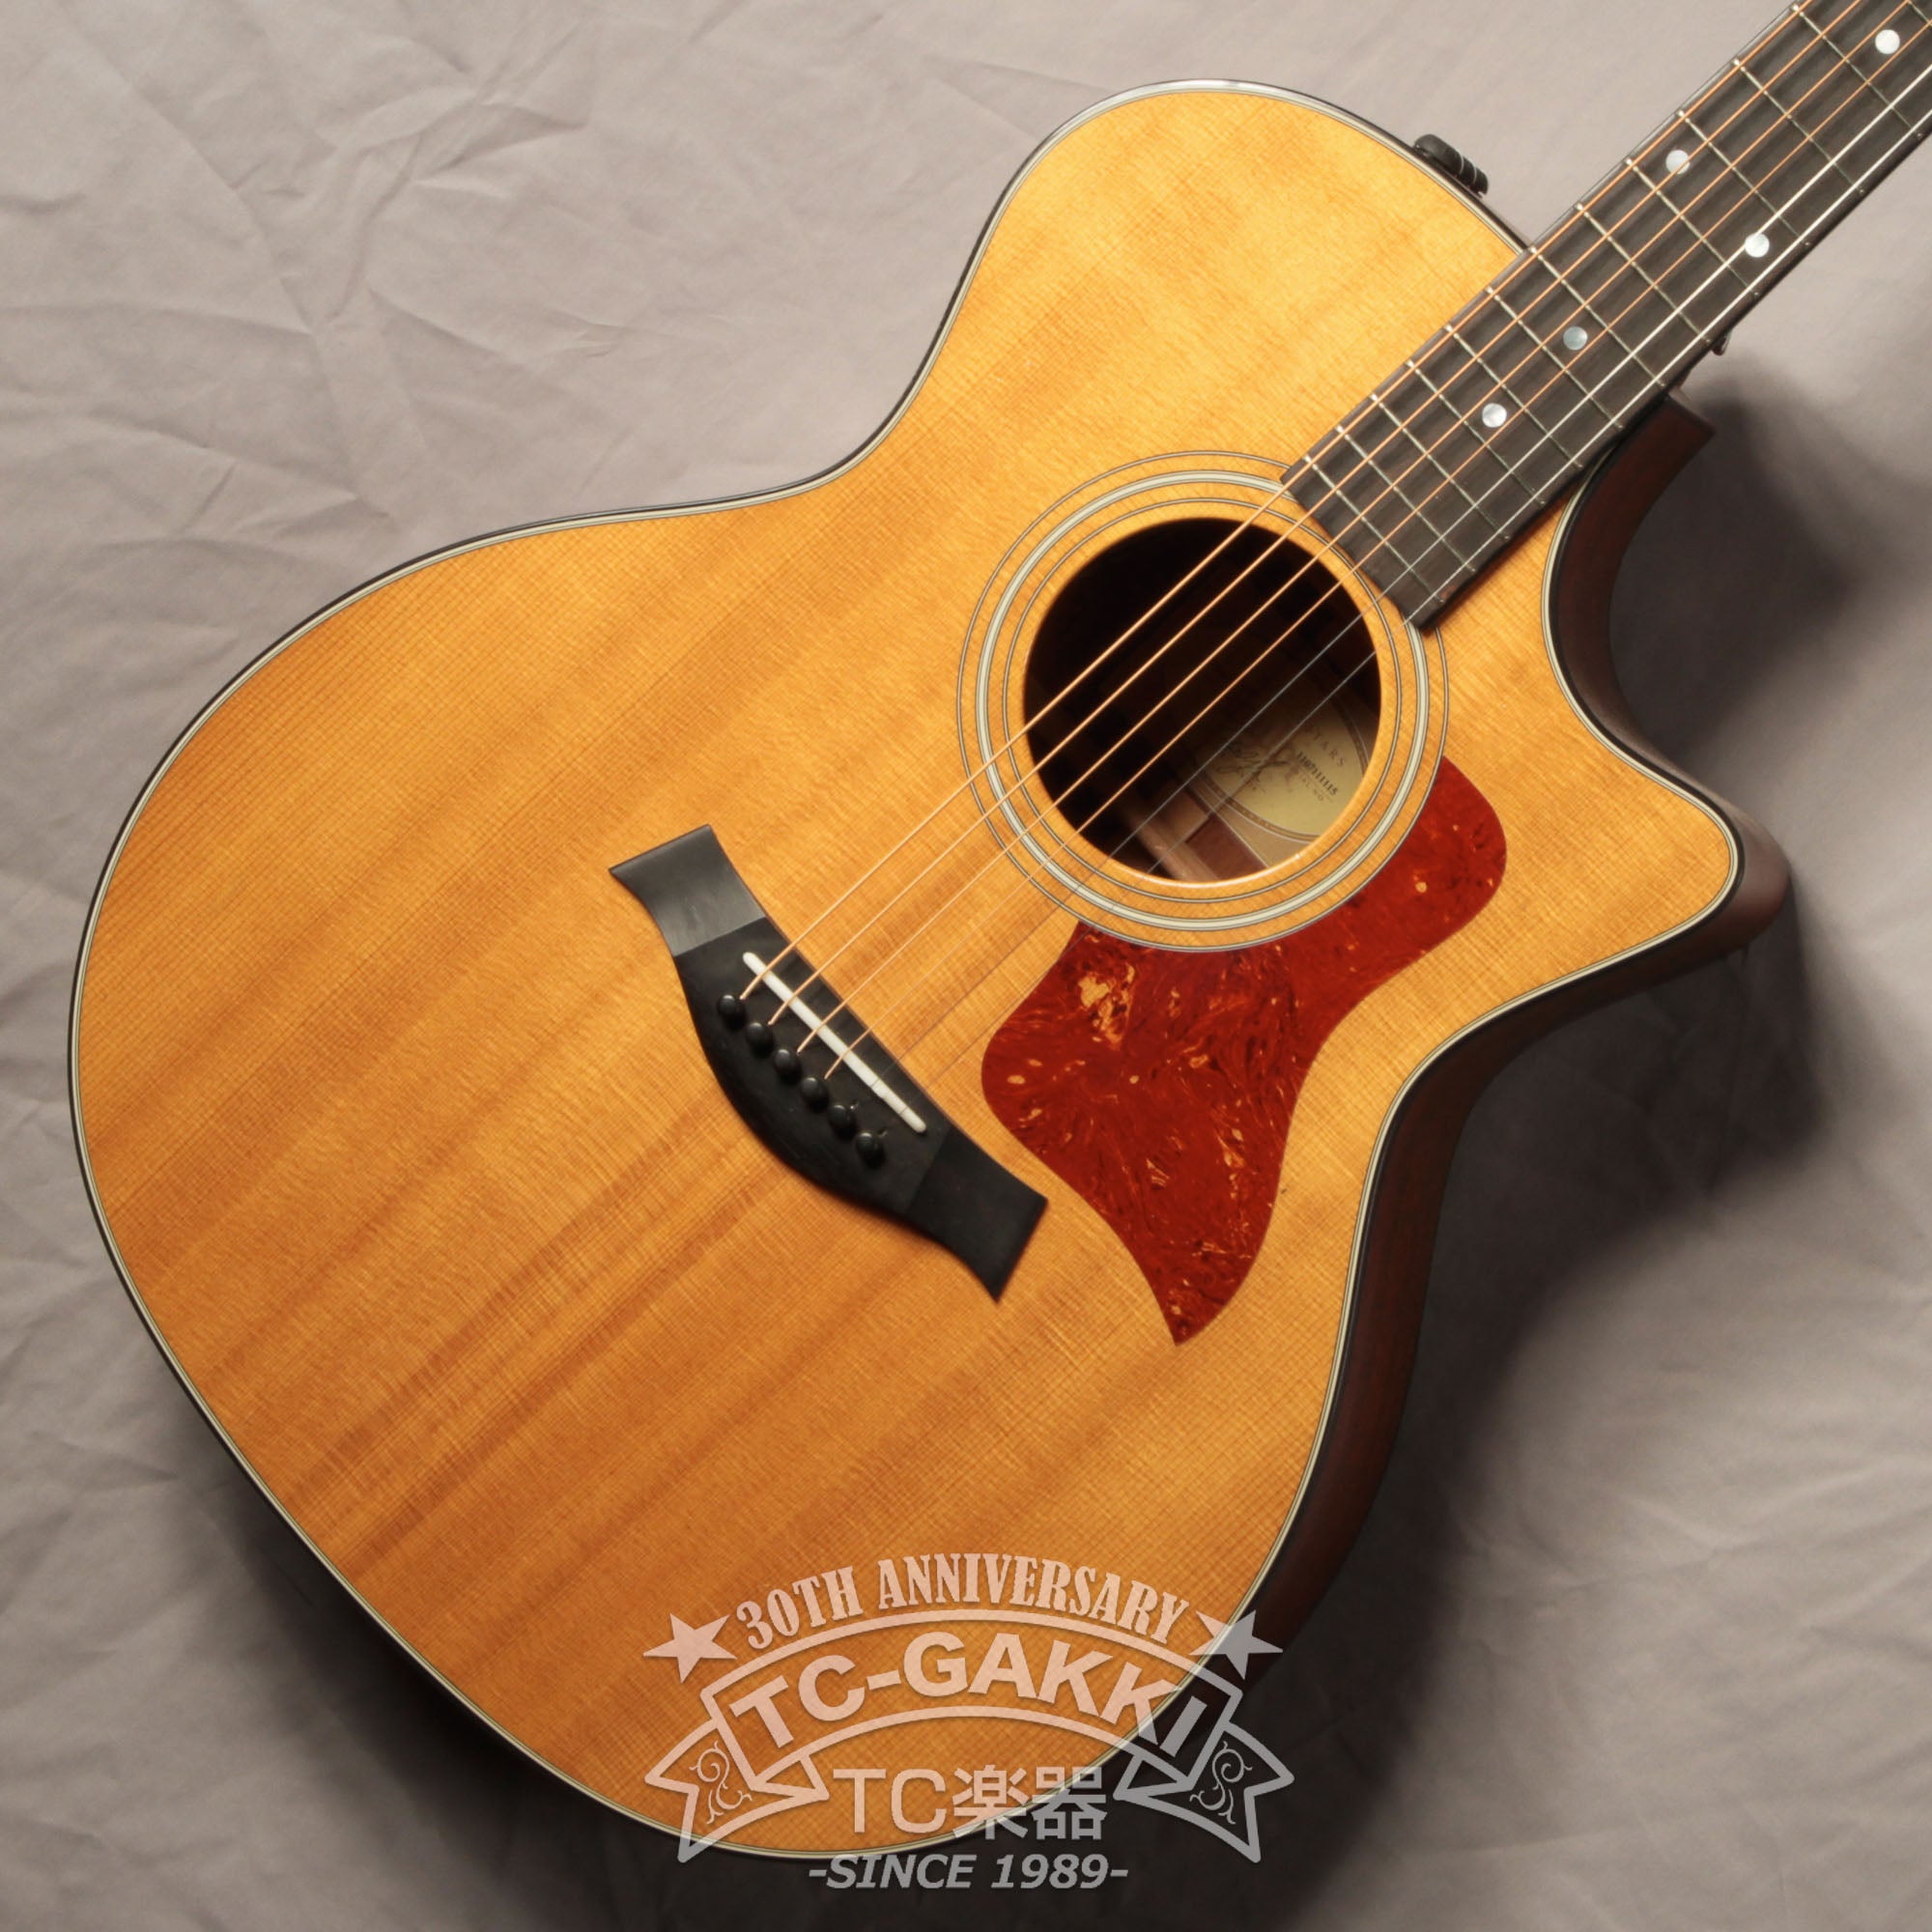 Taylor 314ce With ES3 Preamp 2011 0 Guitar For Sale TCGAKKI